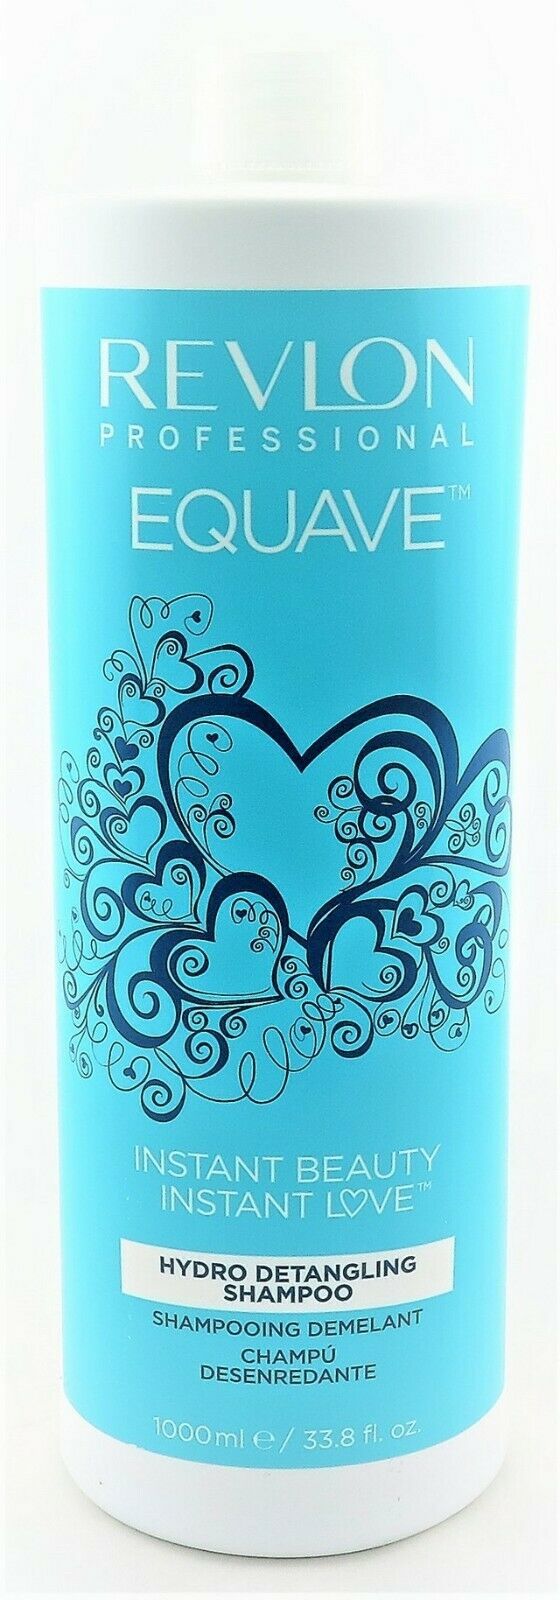 Revlon Professional Equave Hydro Detangling and items